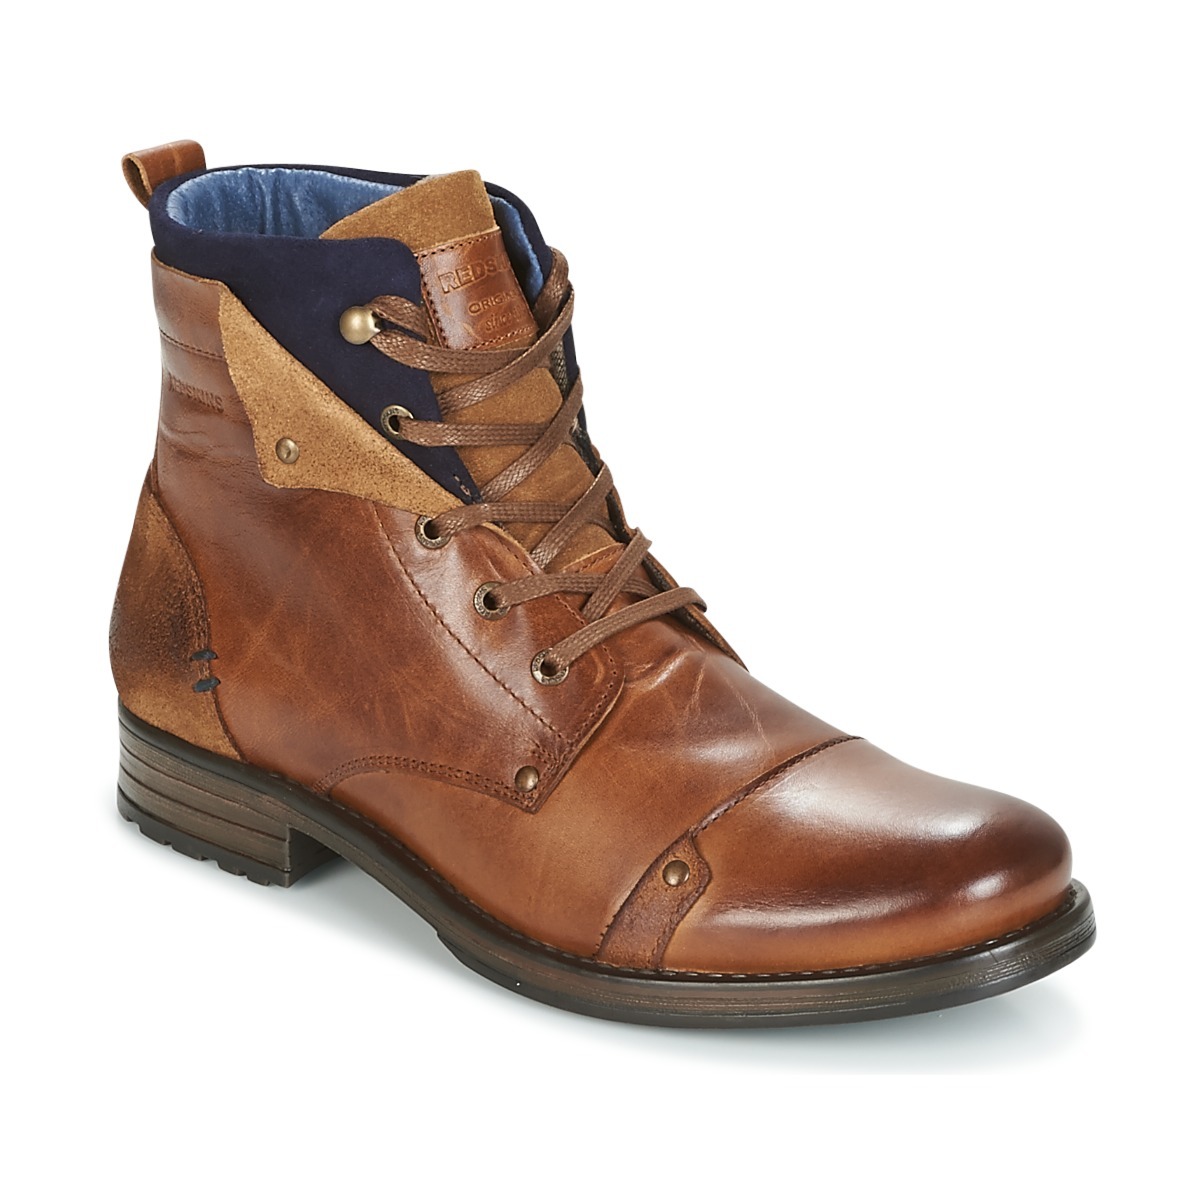 Redskins Mens Boots in Brown from Spartoo GOOFASH